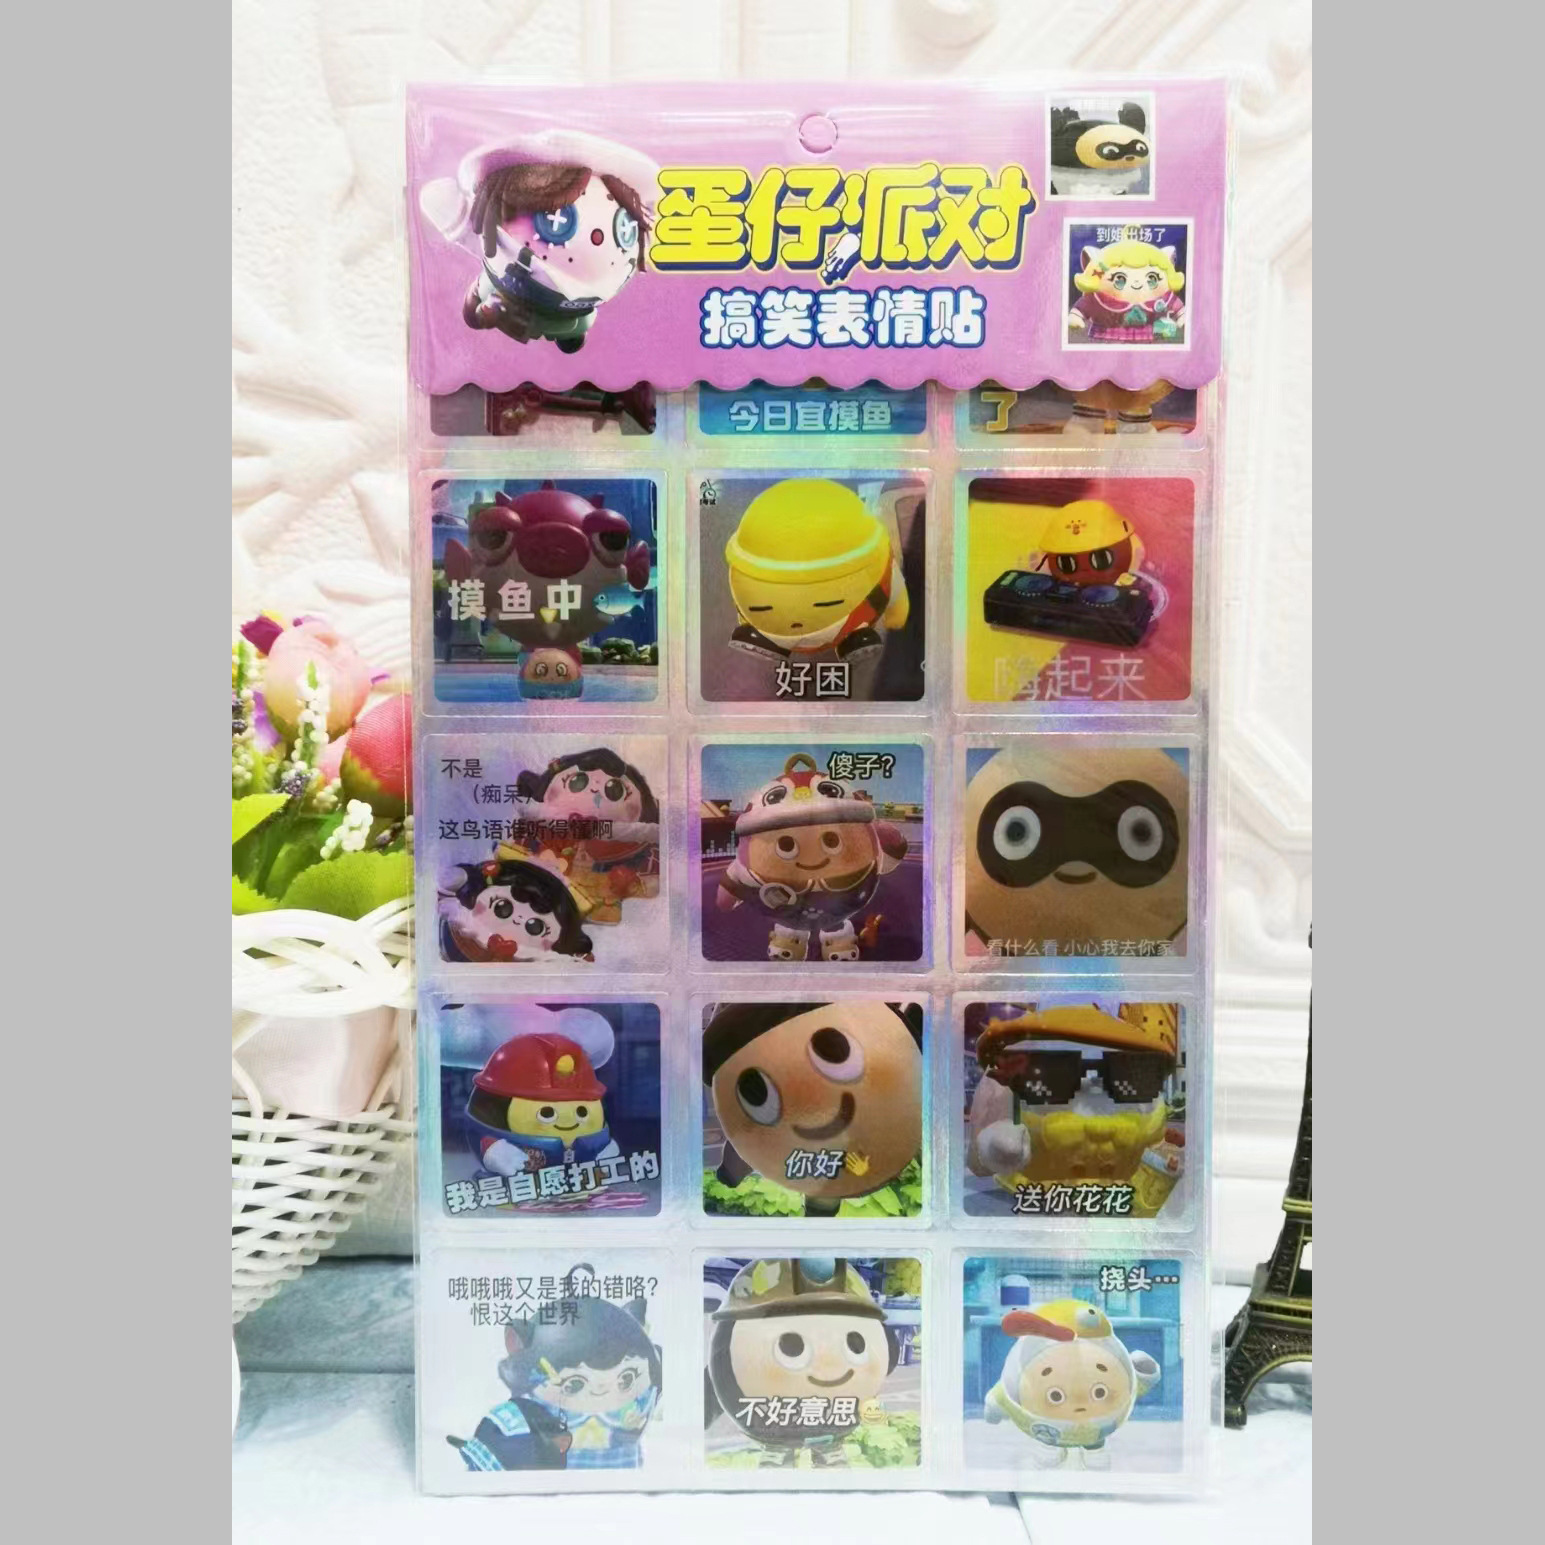 Egg Puff Party Funny Emoji Stickers Laser Stickers Cute Cartoon Creativity Hand Account Stickers Painting Stickers Stamp Stickers